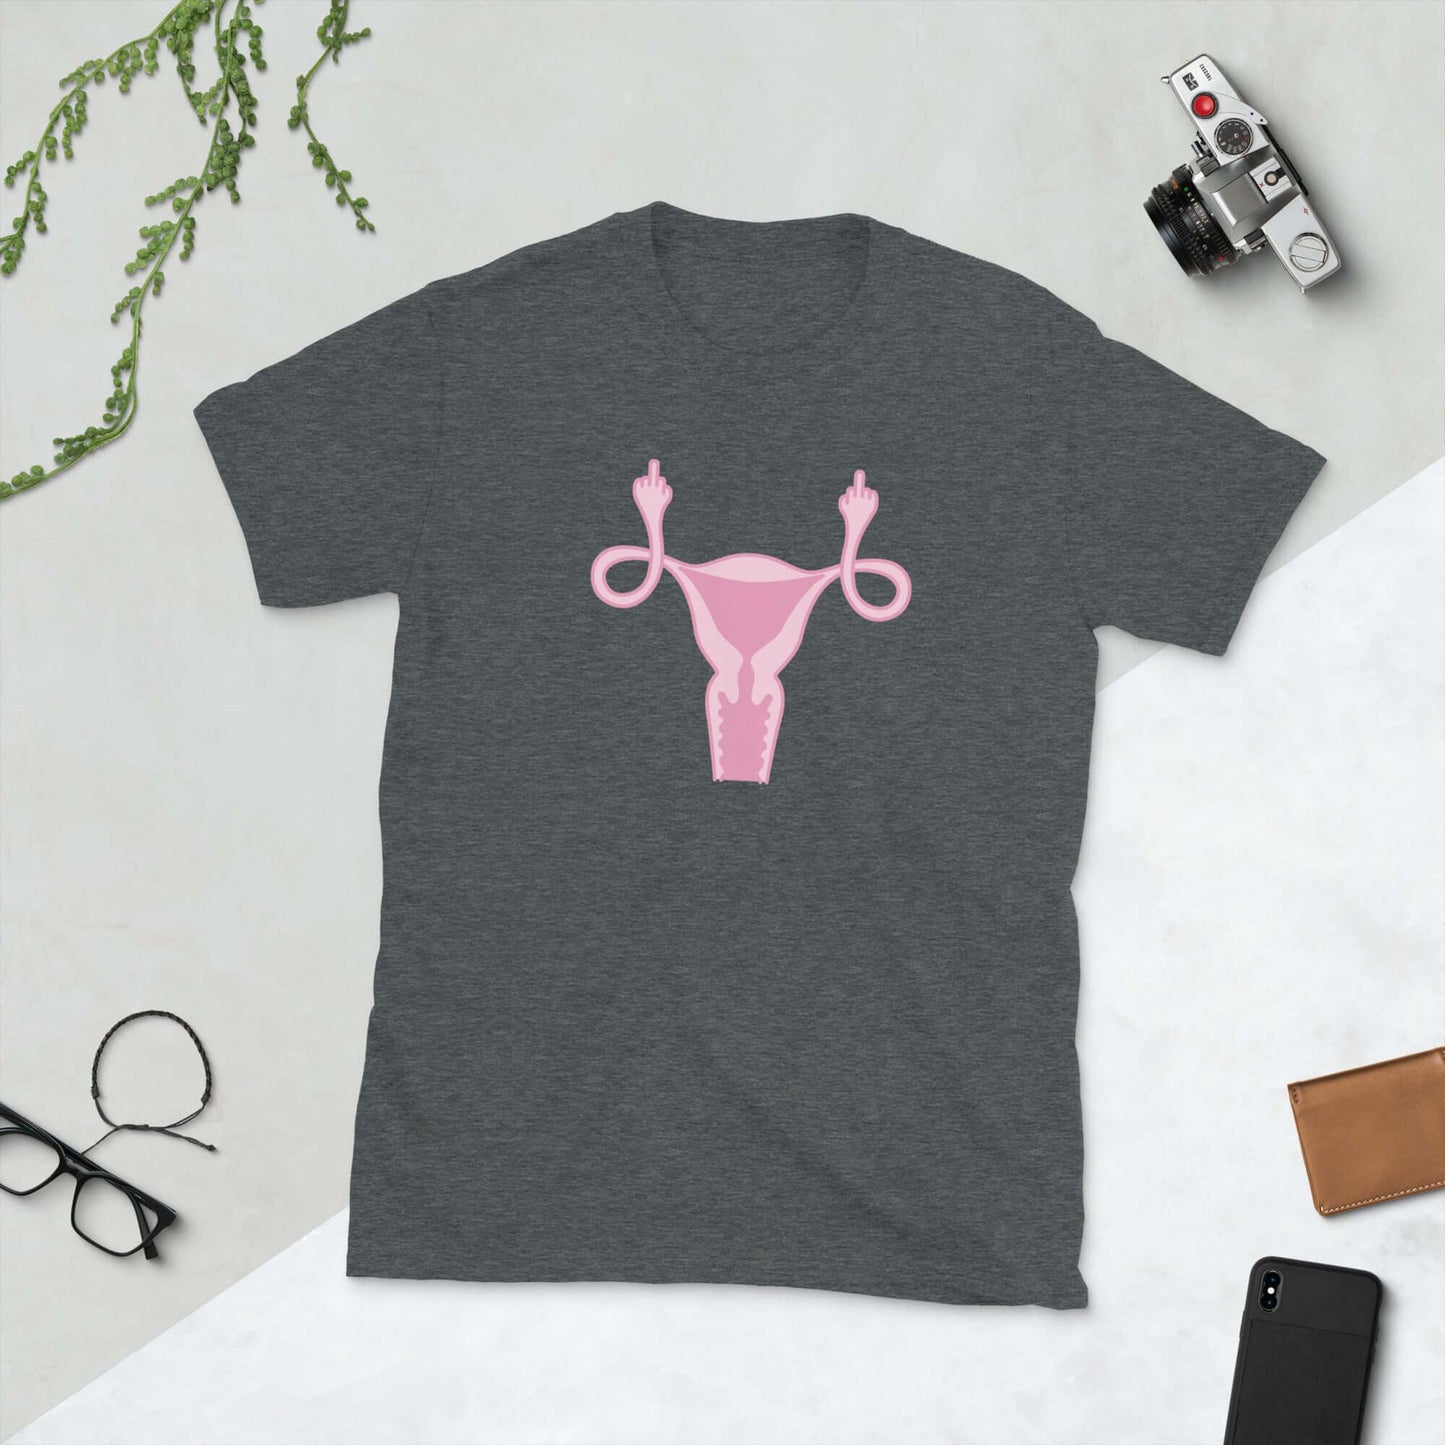 Angry uterus flipping middle finger T-shirt